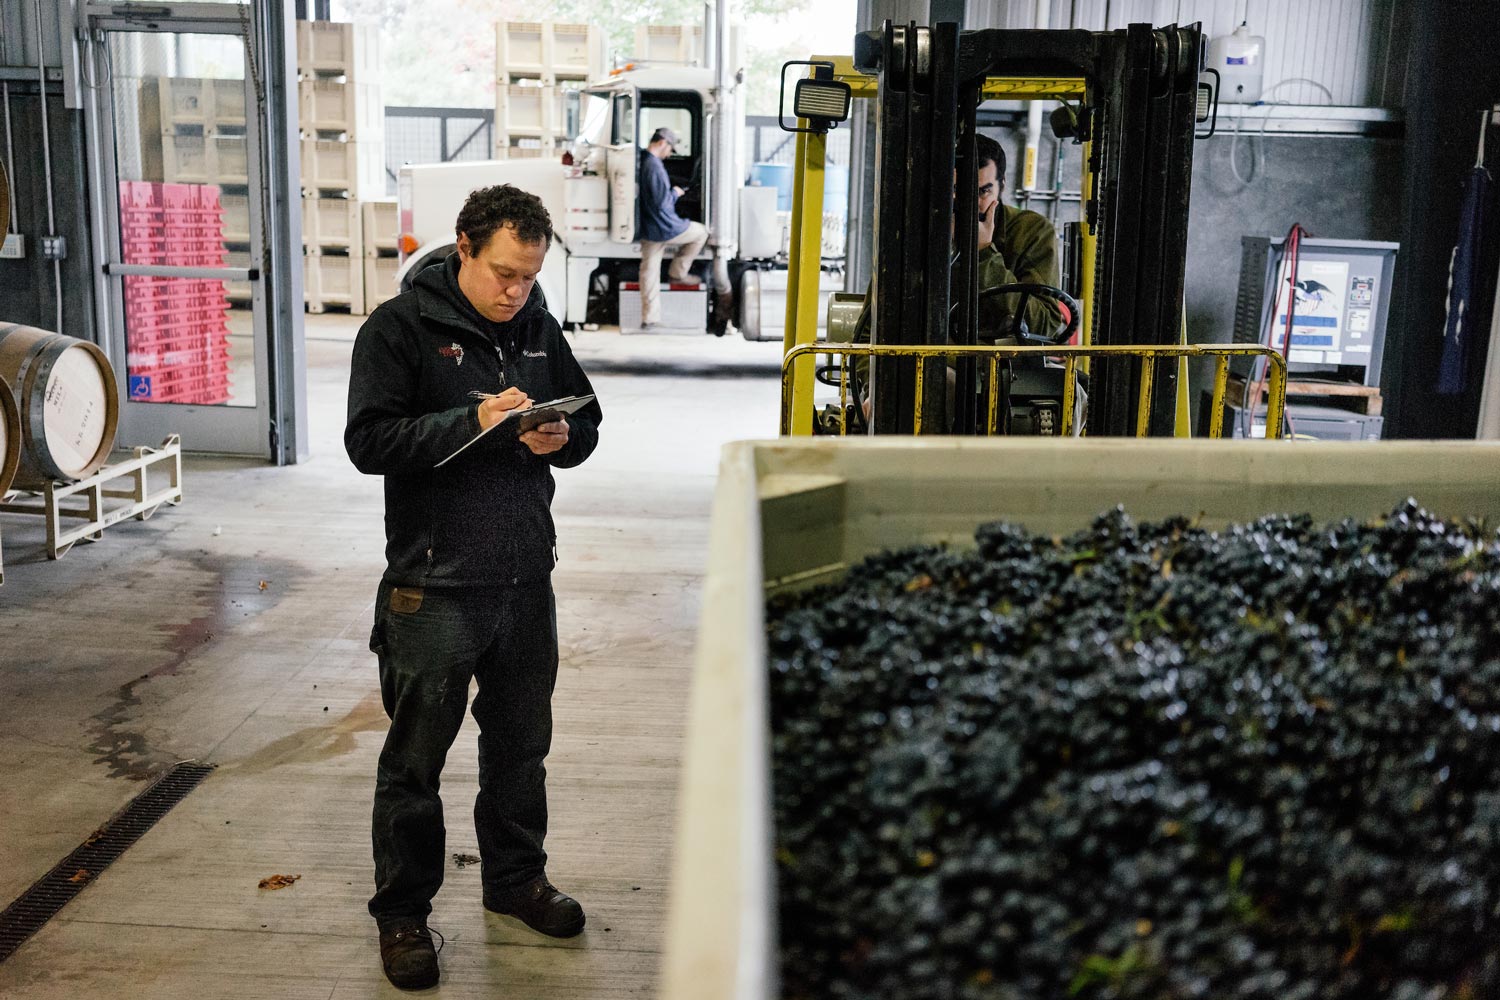 checking the grapes in the boxes